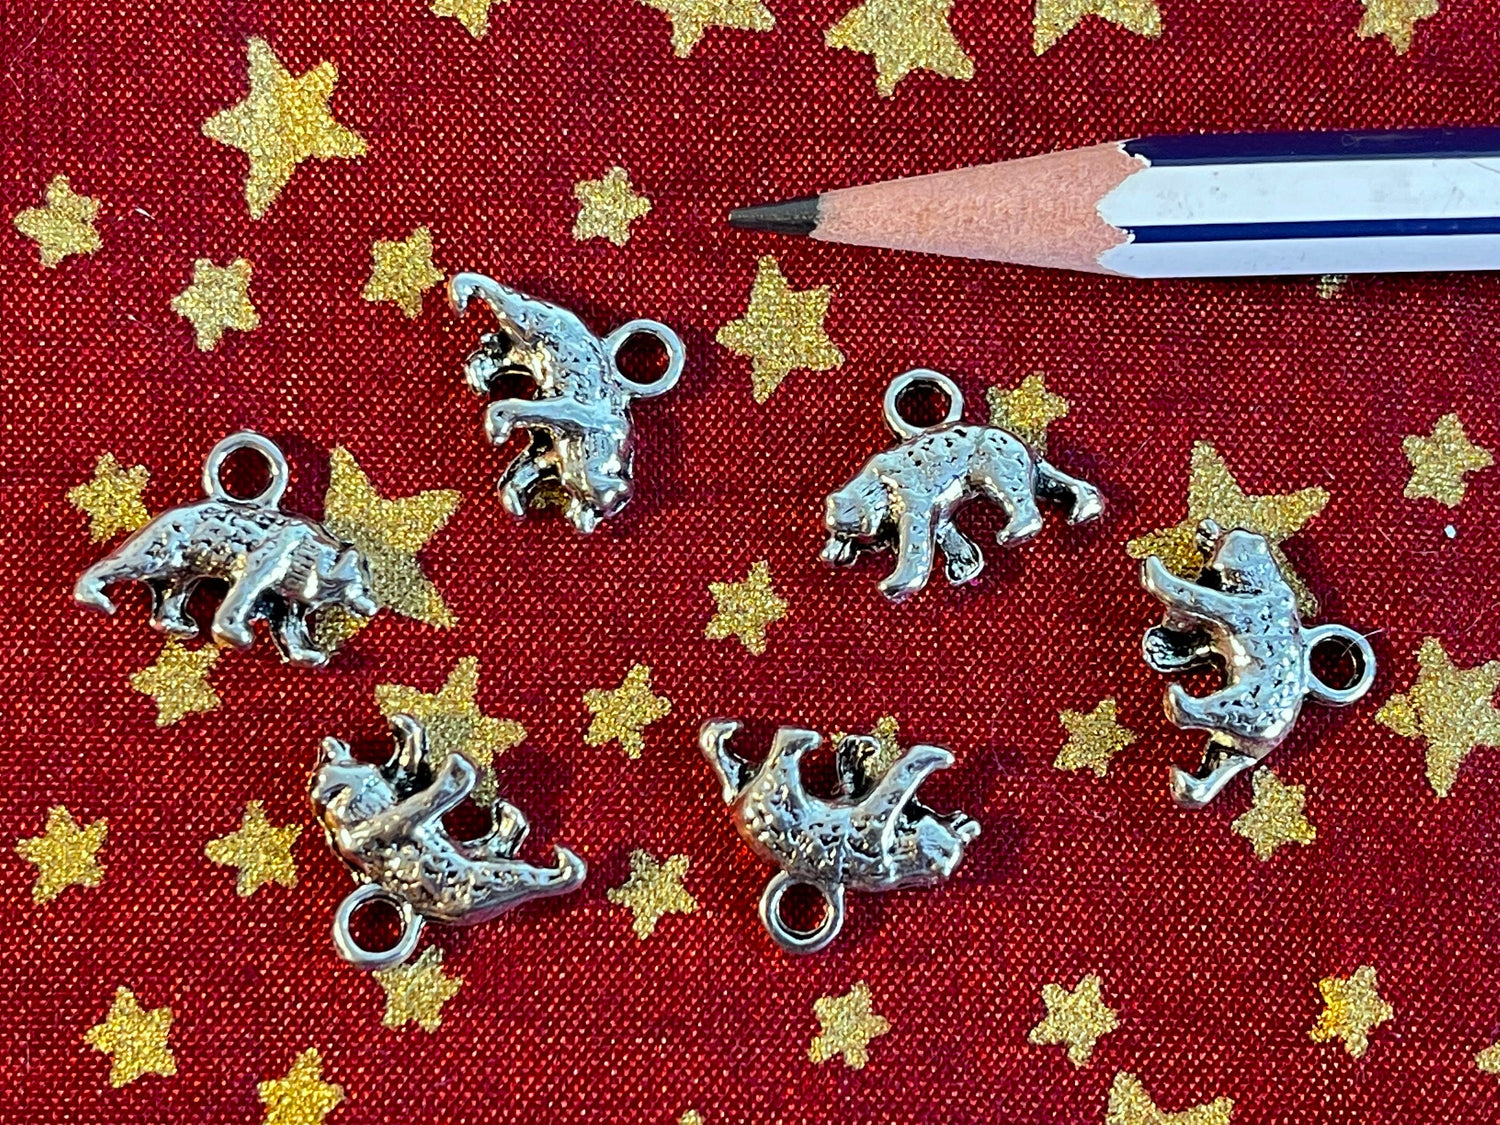 Woodland animals 3D charms–bear, fox, fawn, squirrel–choose one or set–realistic forest creature antique silver charm, pendant for jewelry